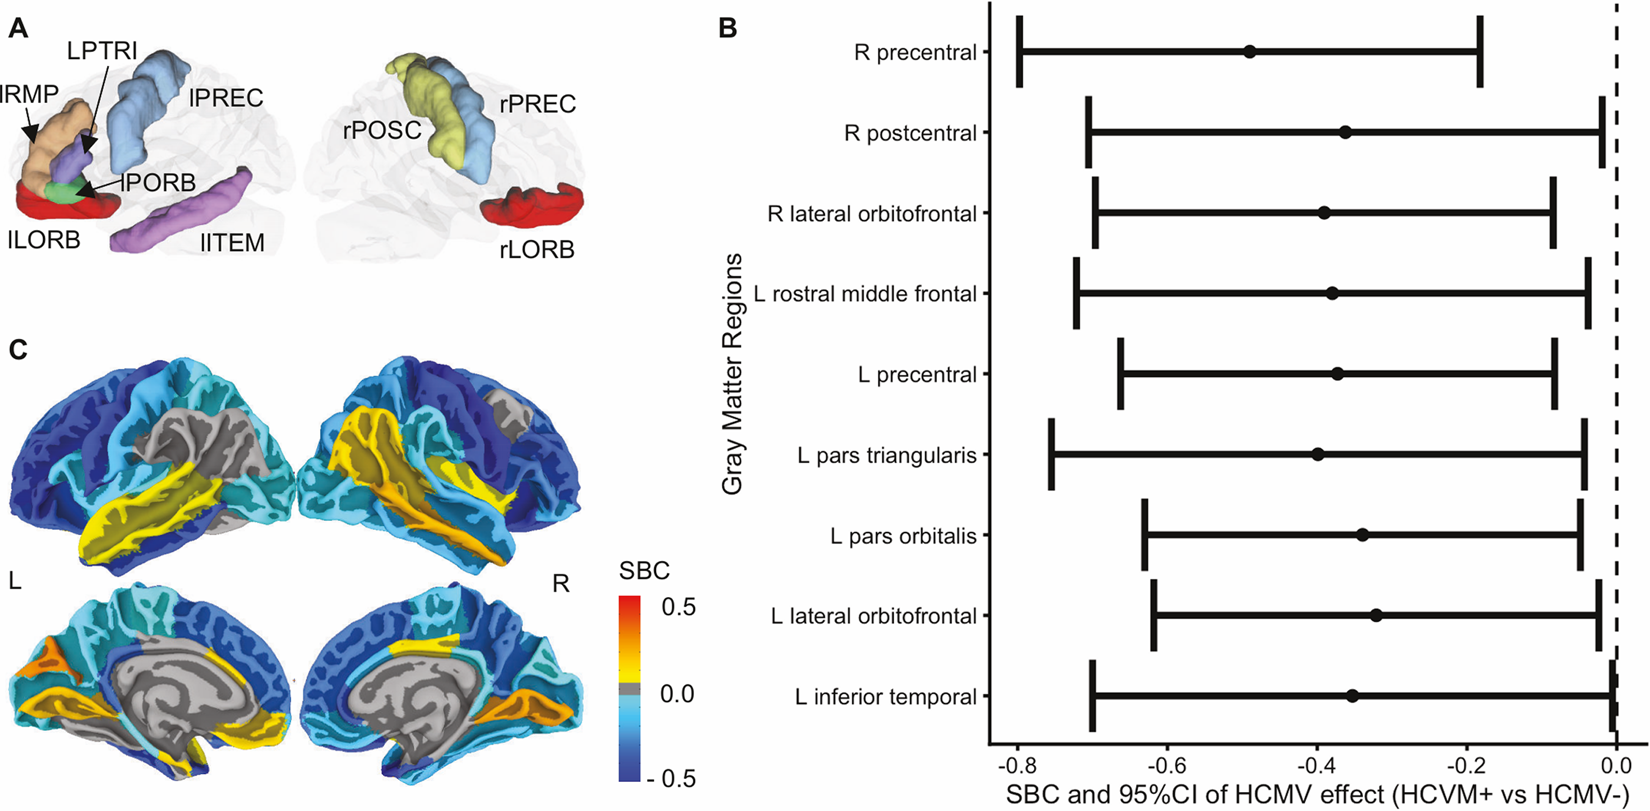 Få Skifte tøj mærke Association between cytomegalovirus infection, reduced gray matter volume,  and resting-state functional hypoconnectivity in major depressive disorder:  a replication and extension | Translational Psychiatry